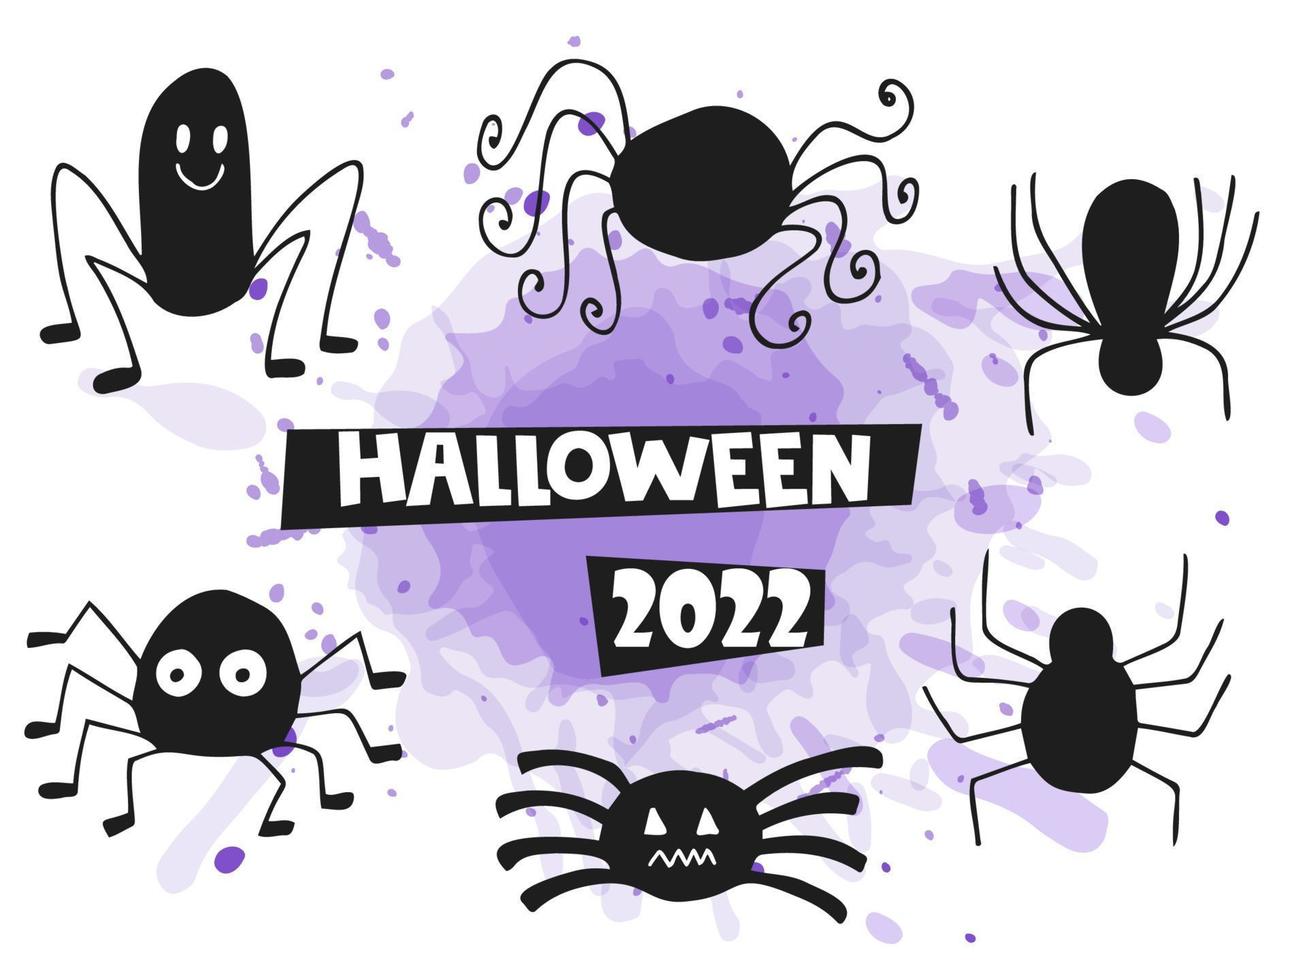 Halloween 2022 - October 31. A traditional holiday. Trick or treat. Vector illustration in hand-drawn doodle style. Set of silhouettes of cute spiders with a purple watercolor spot.